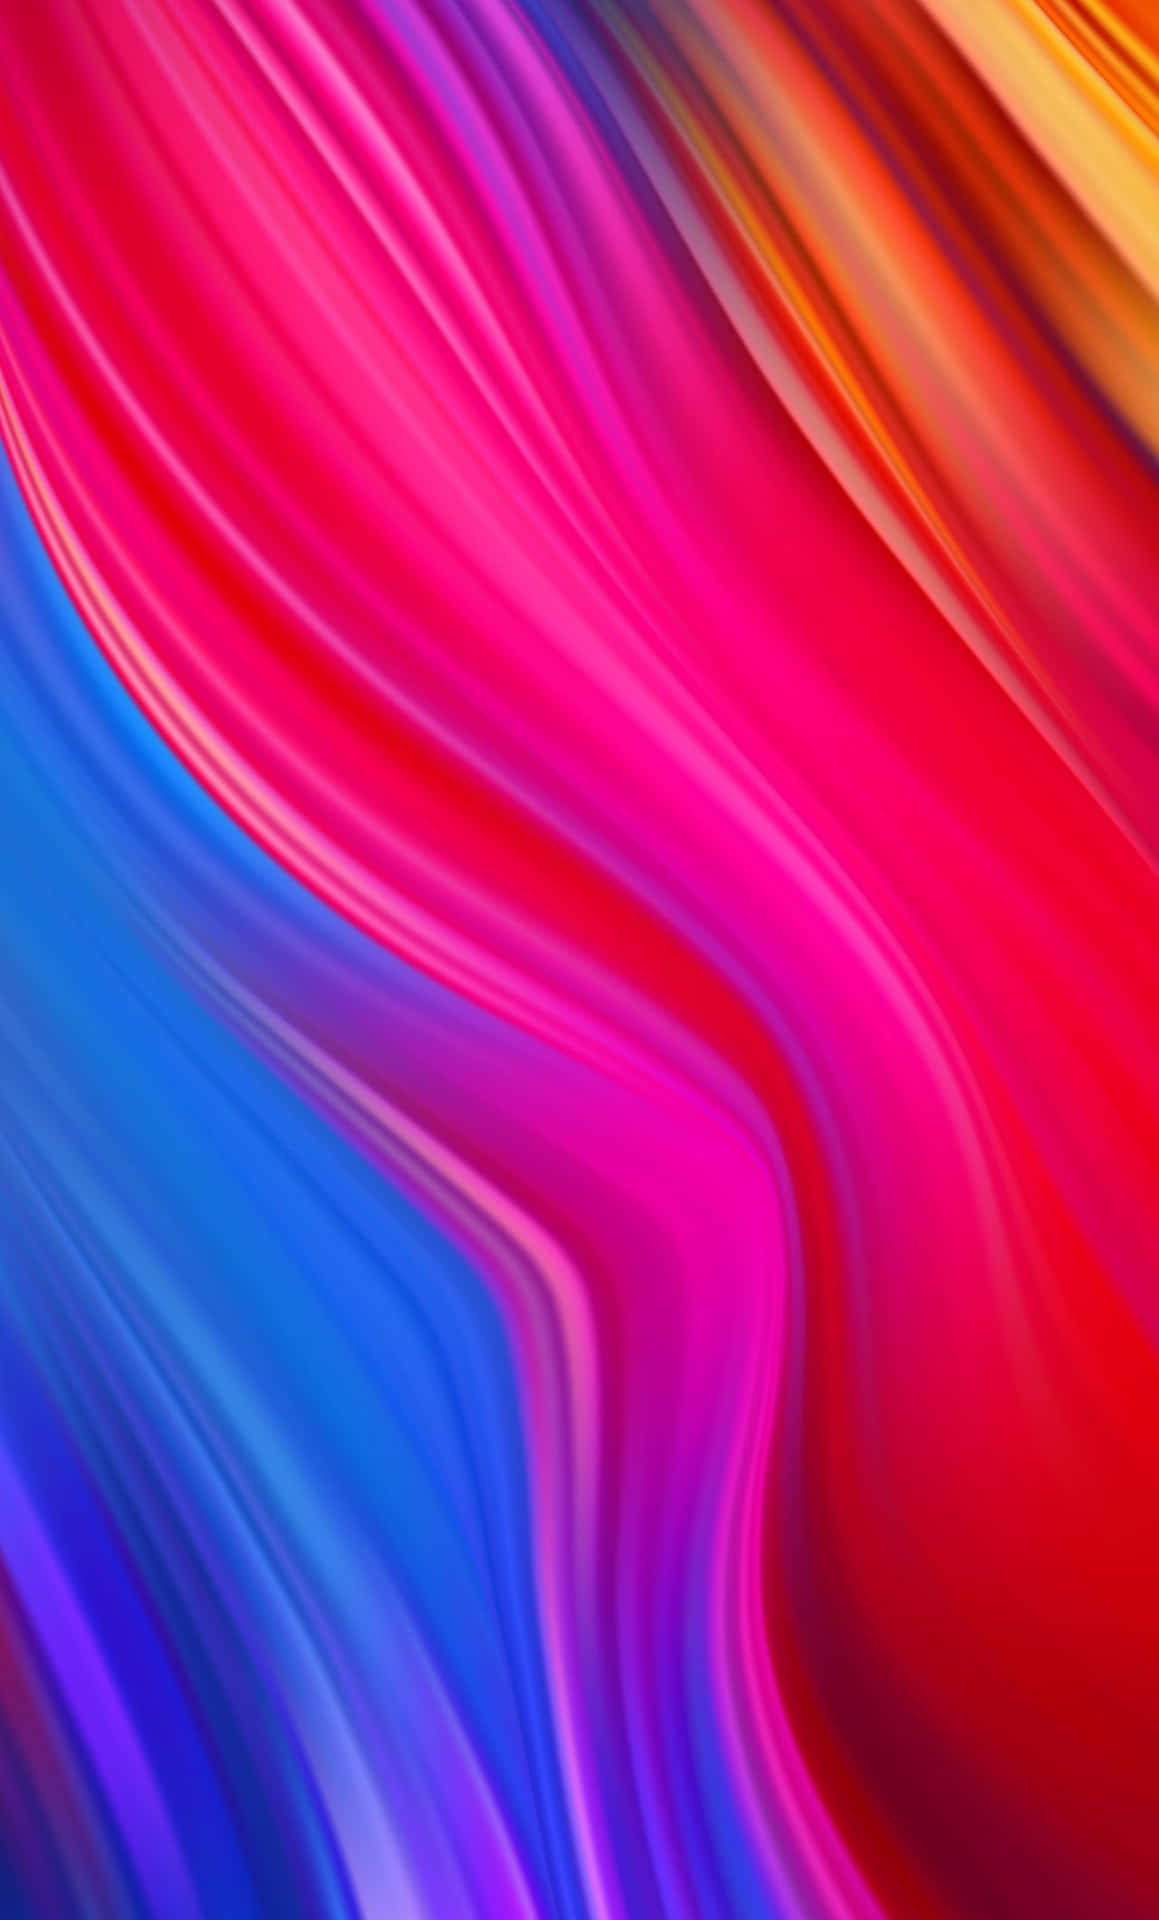 Embrace The Abstraction Wallpaper